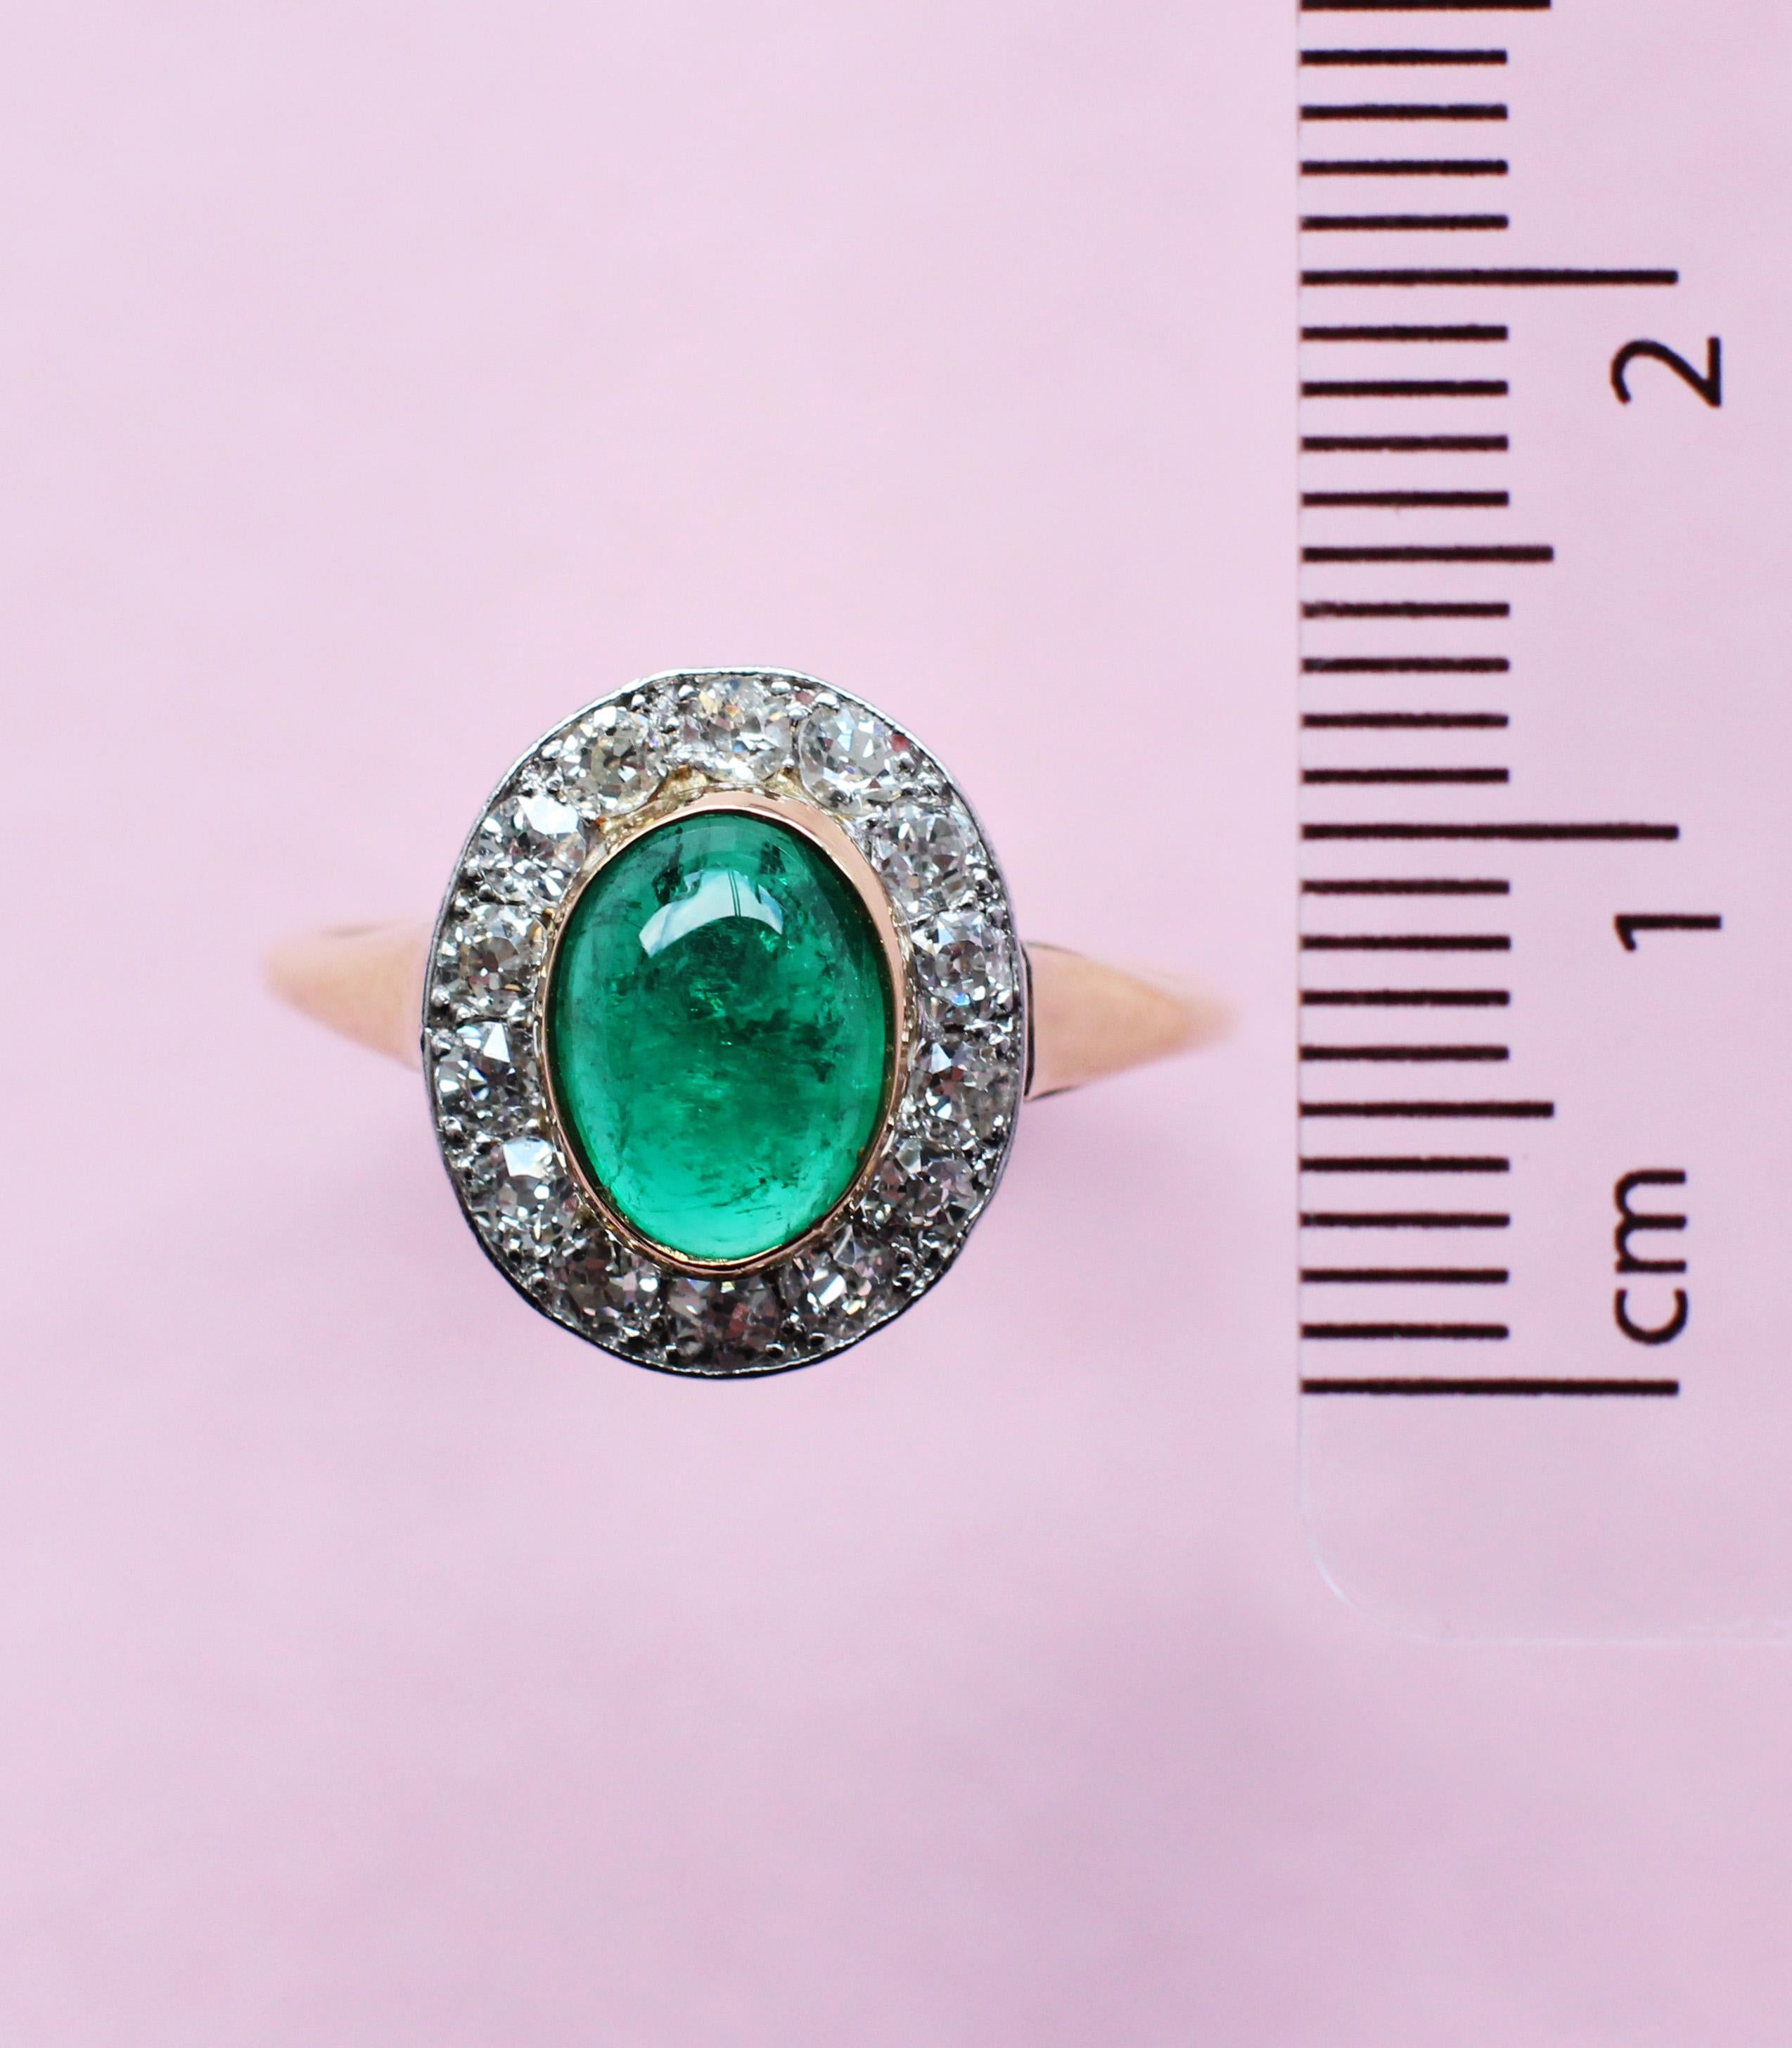 The oval cabochon emerald at the heart of this spectacular ring was hand-picked by a member of the Haruni family. Its intense green colour is accentuated by the elegant sparkle of the white round brilliant diamonds that surround it. Set in yellow